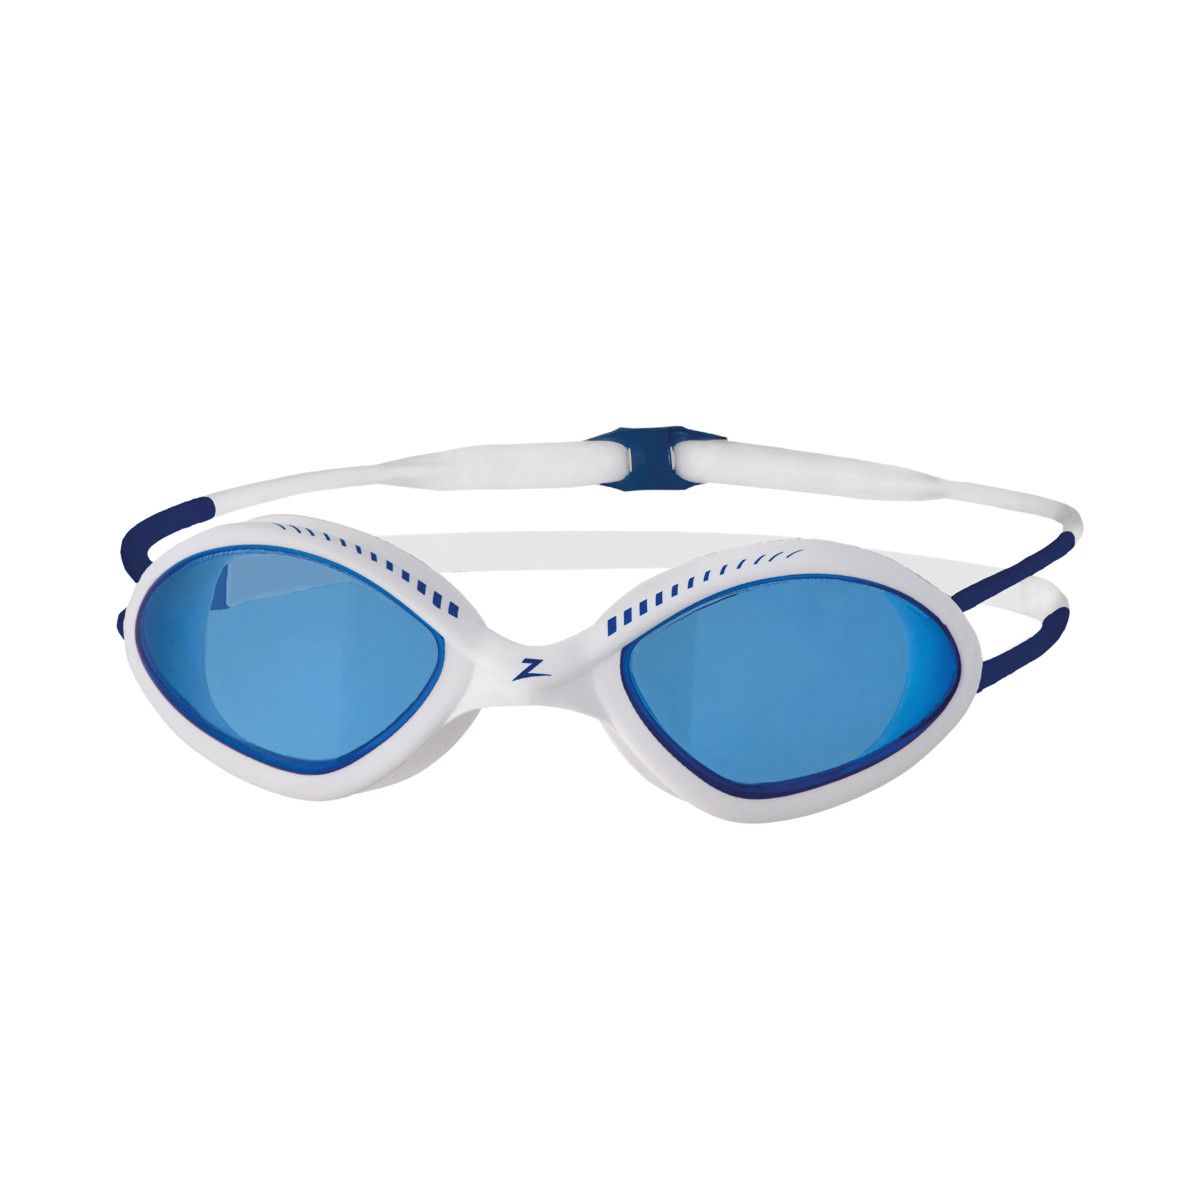 Zoggs Tiger Goggle White/Blue/Tint Blue